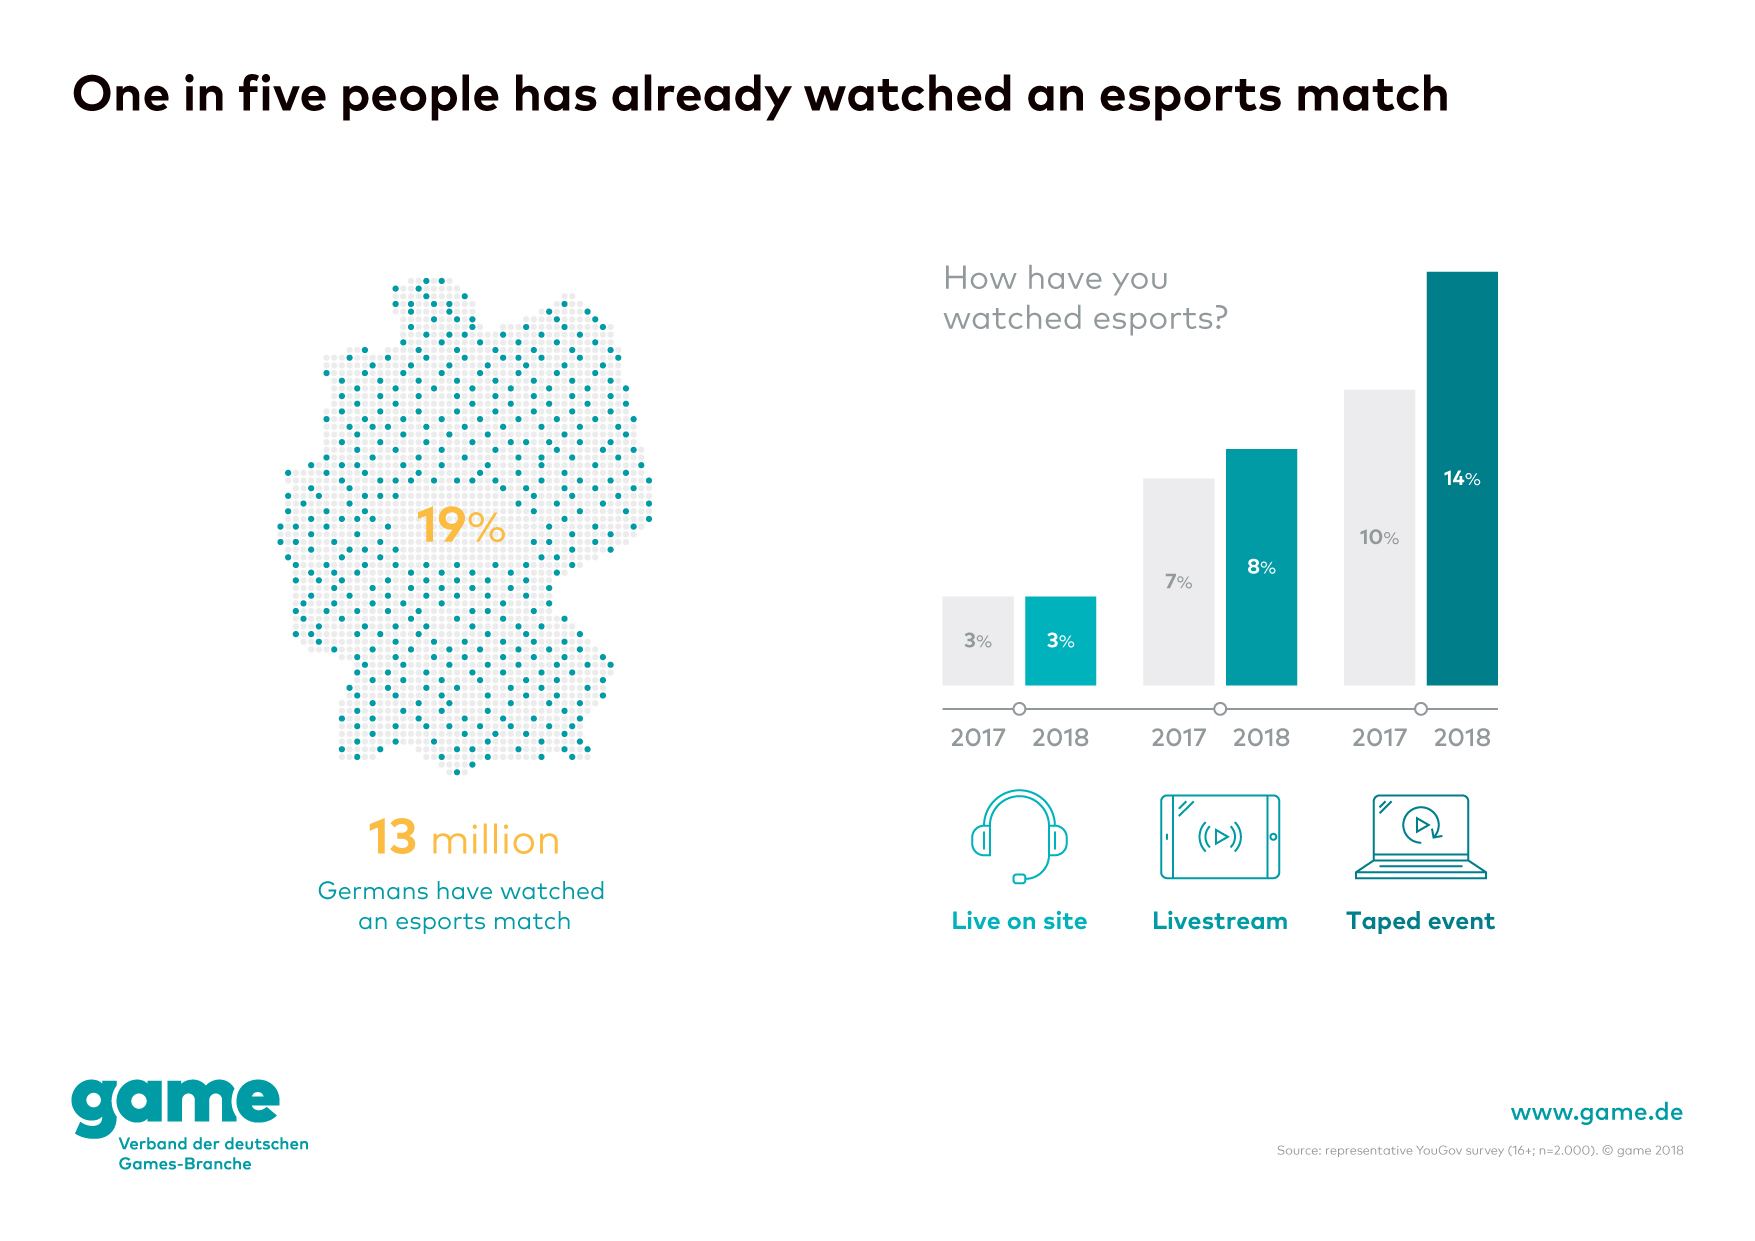 Popularity of esports-matches in 2018